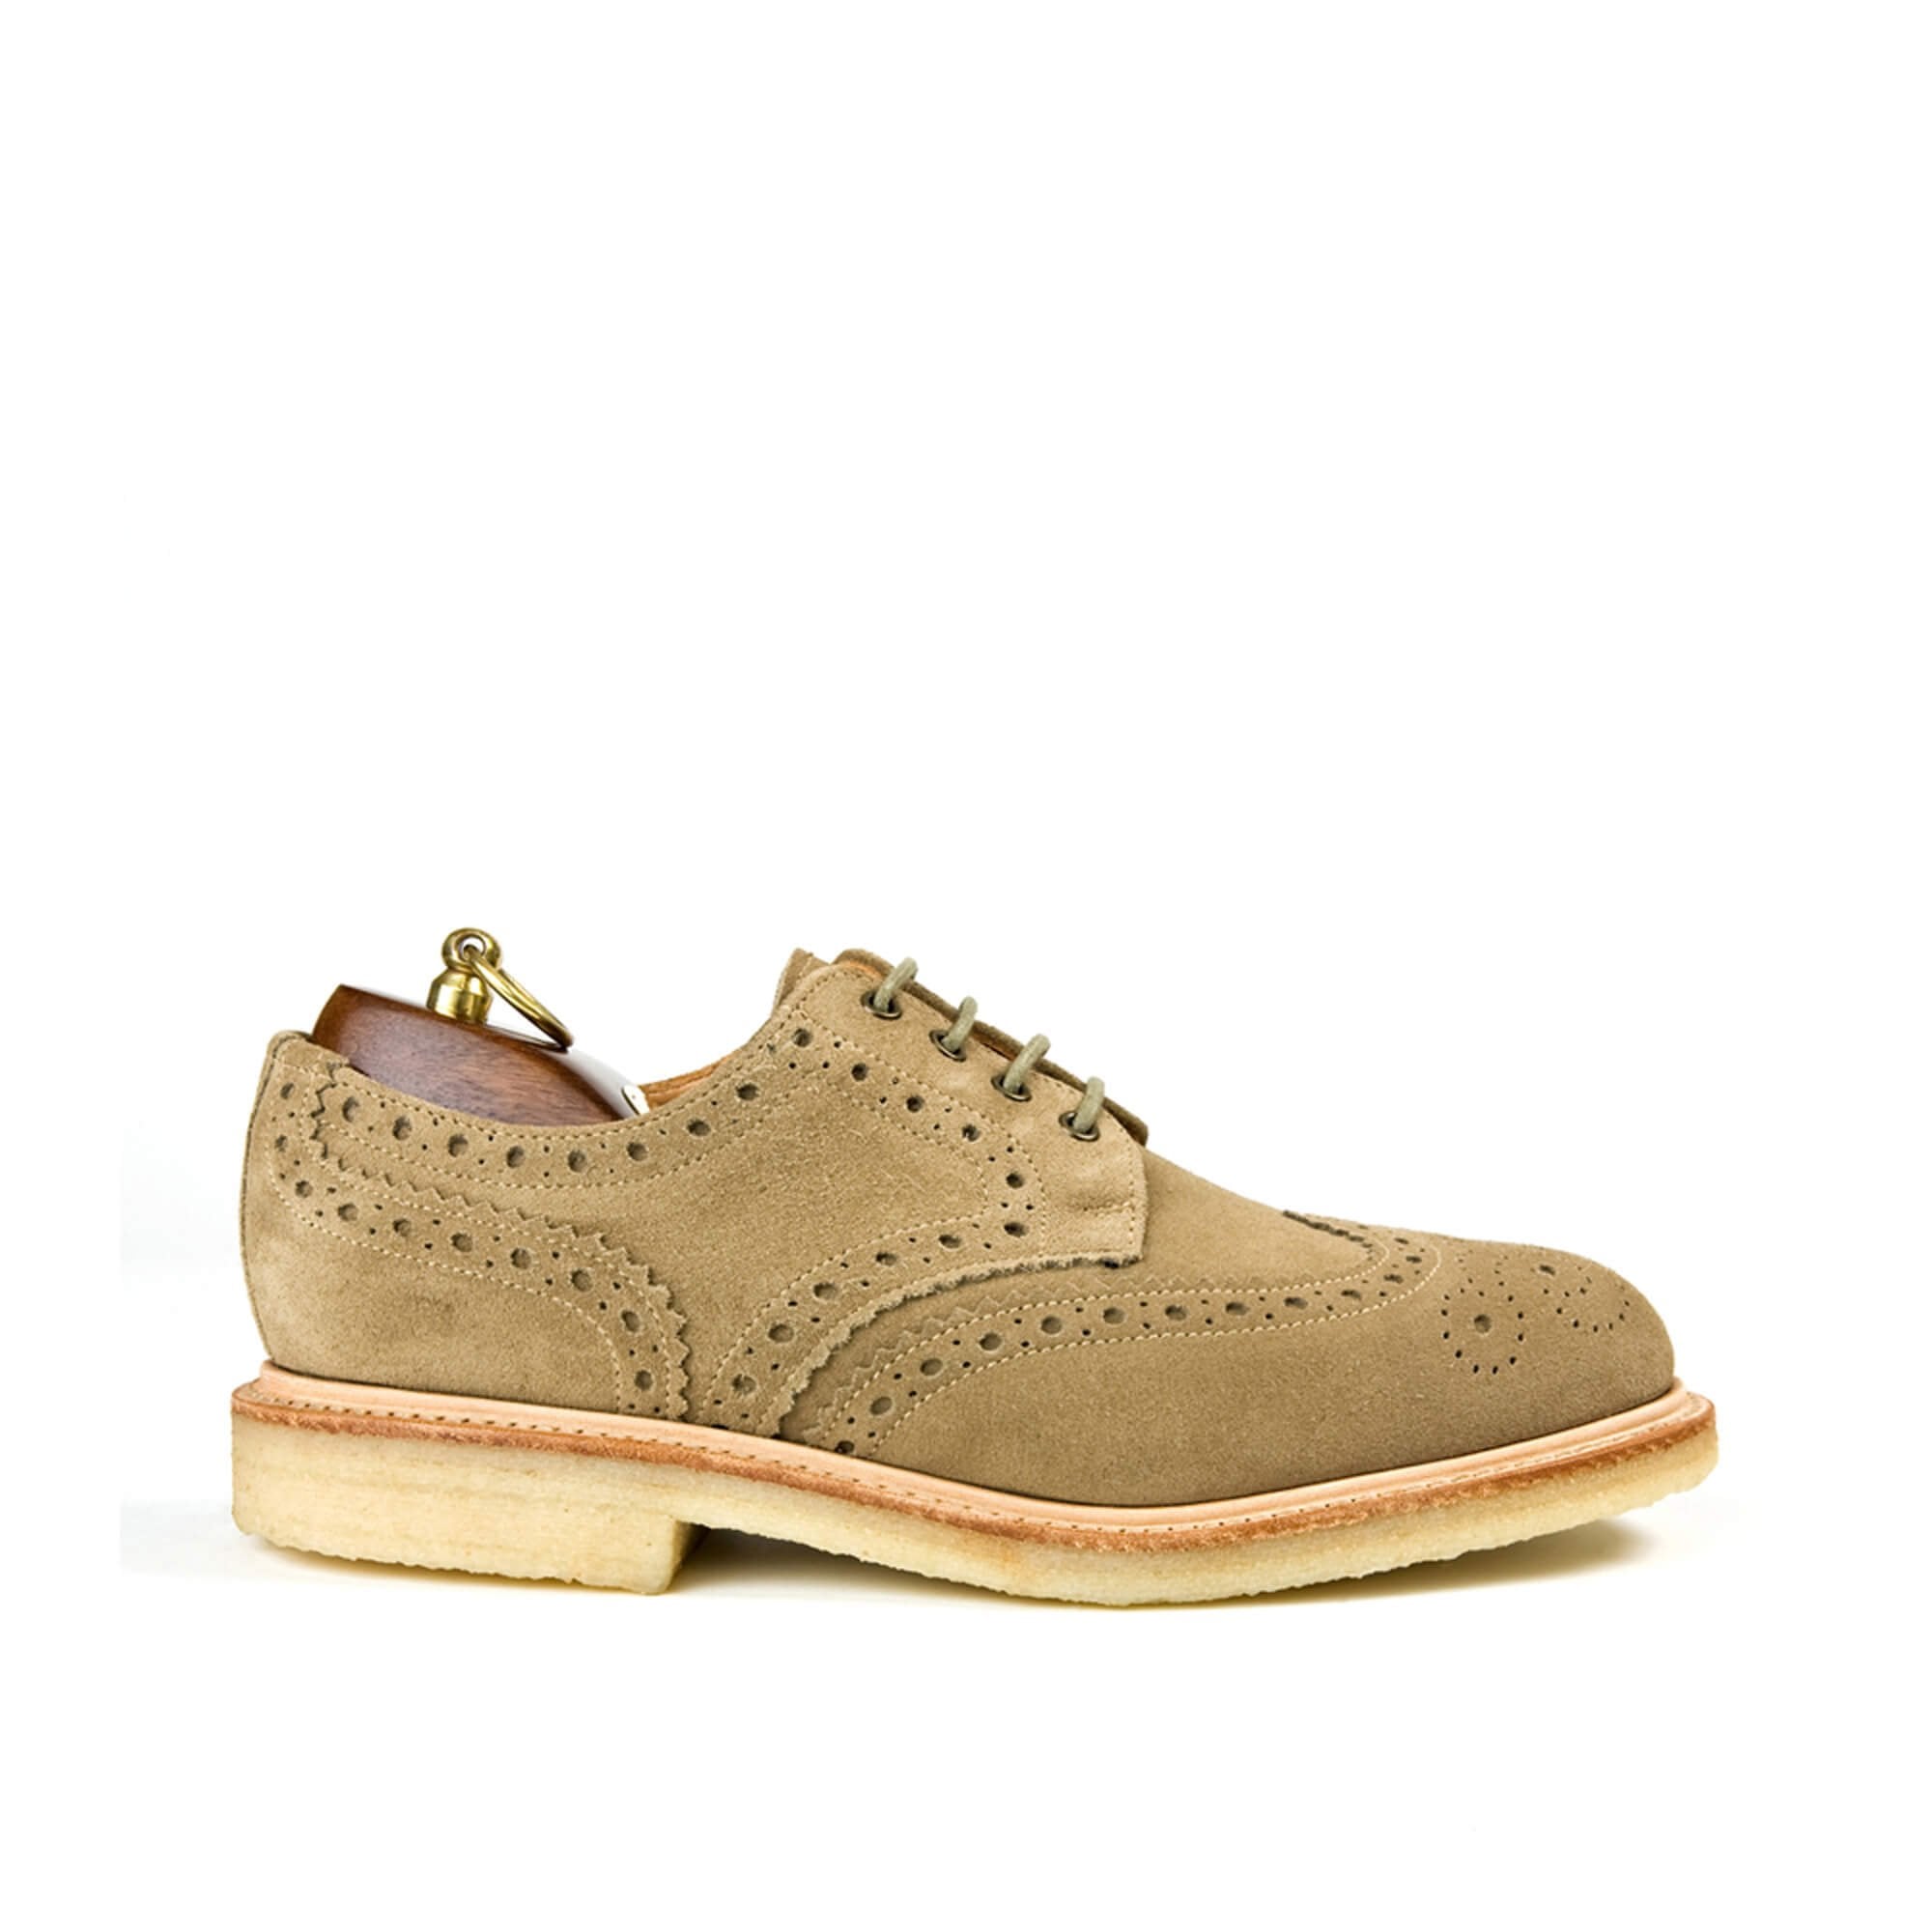 Olly | Mens Wingtip Brogue Gibson | Crepe Sole